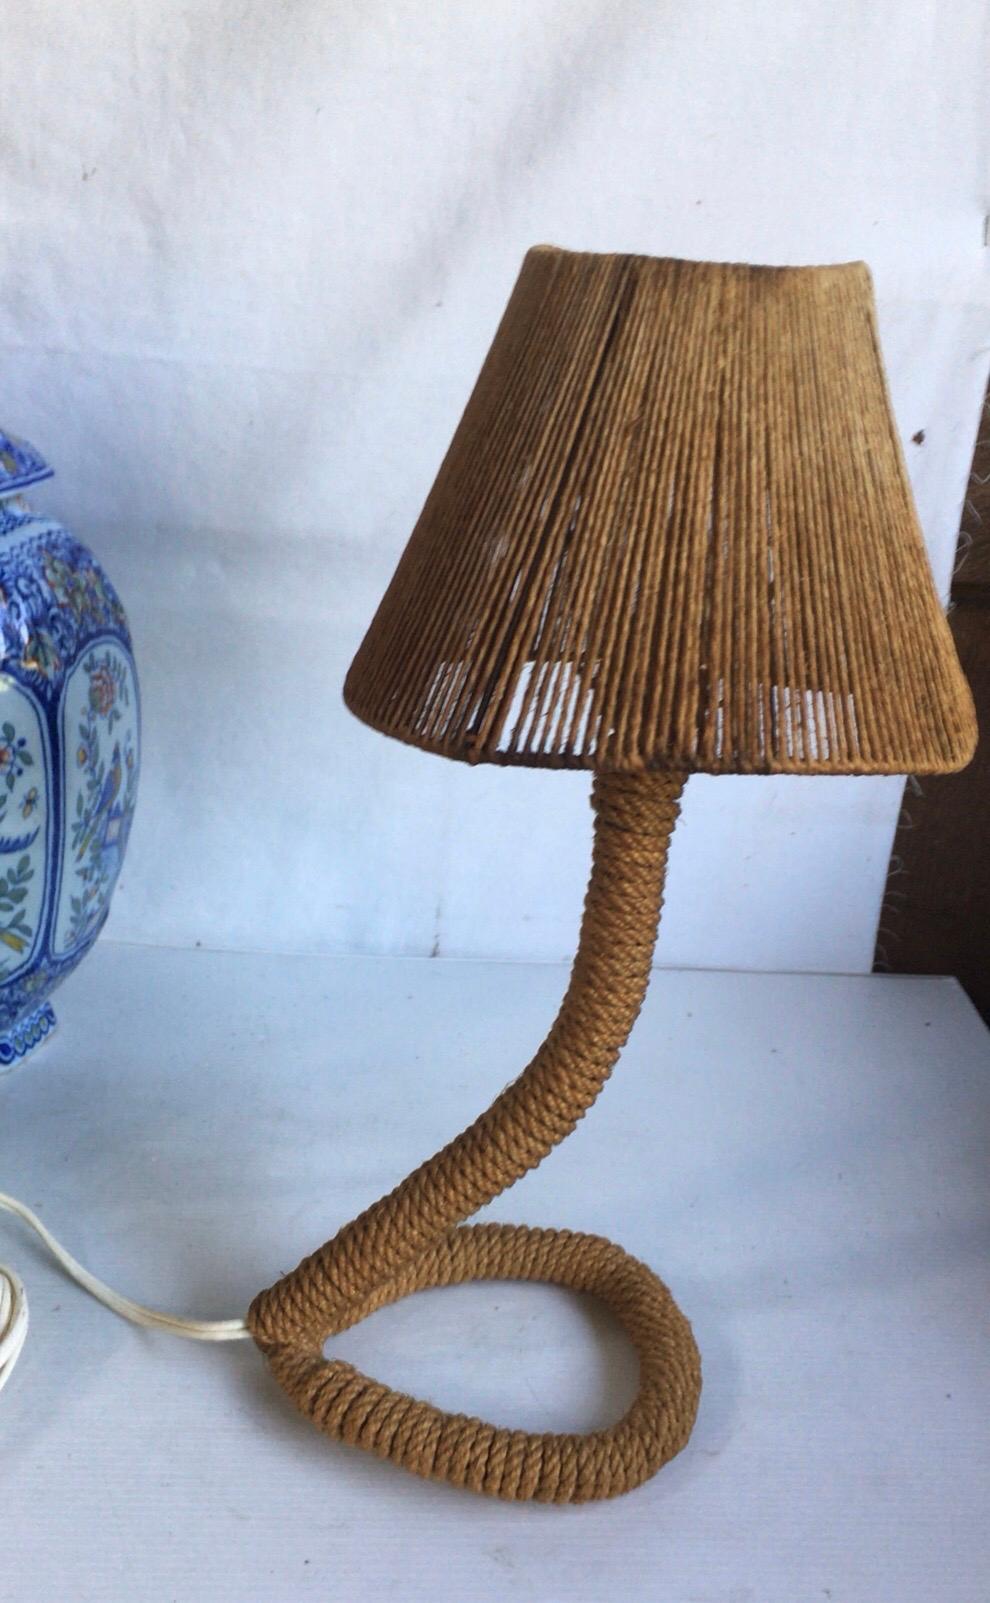 French Midcentury Rope Lamp Audoux Minet, circa 1960